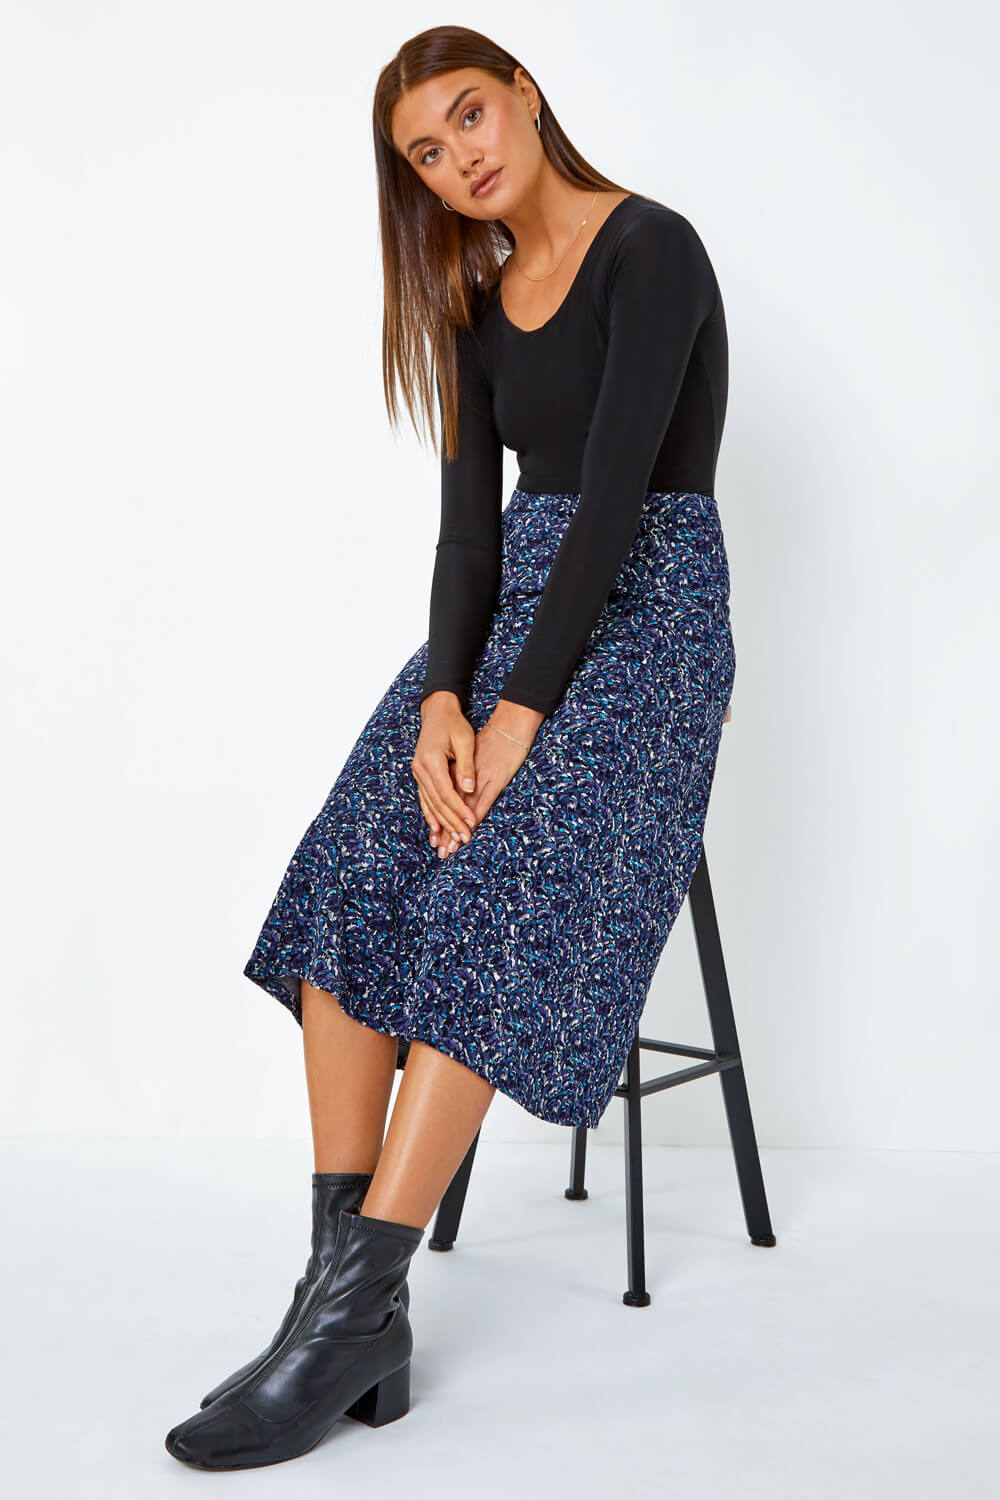 Textured Abstract Print A-Line Stretch Skirt